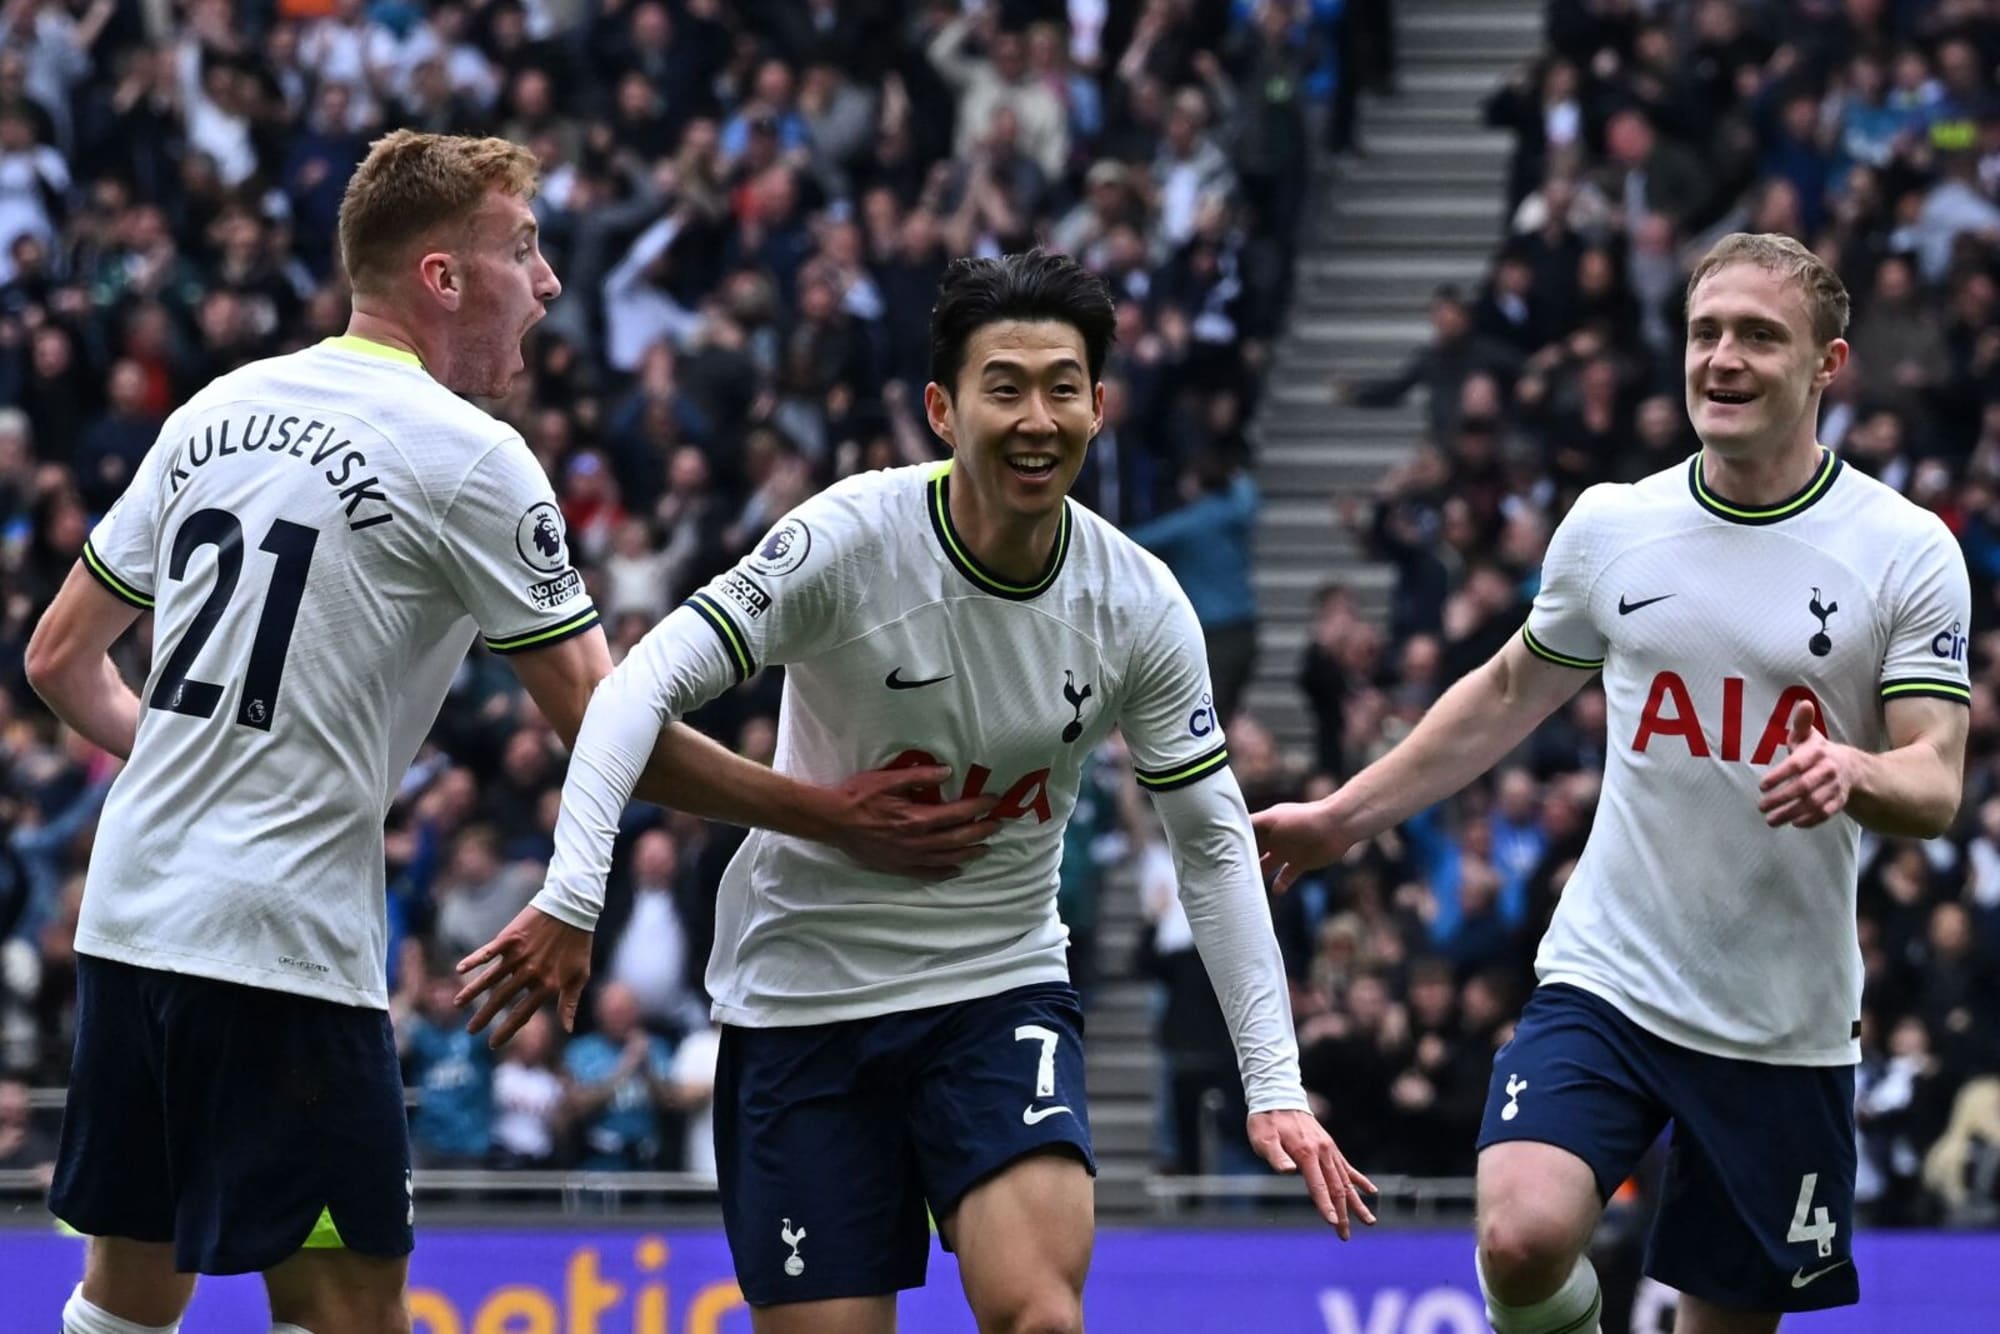 Mason moves make the difference for lucky Tottenham against Brighton